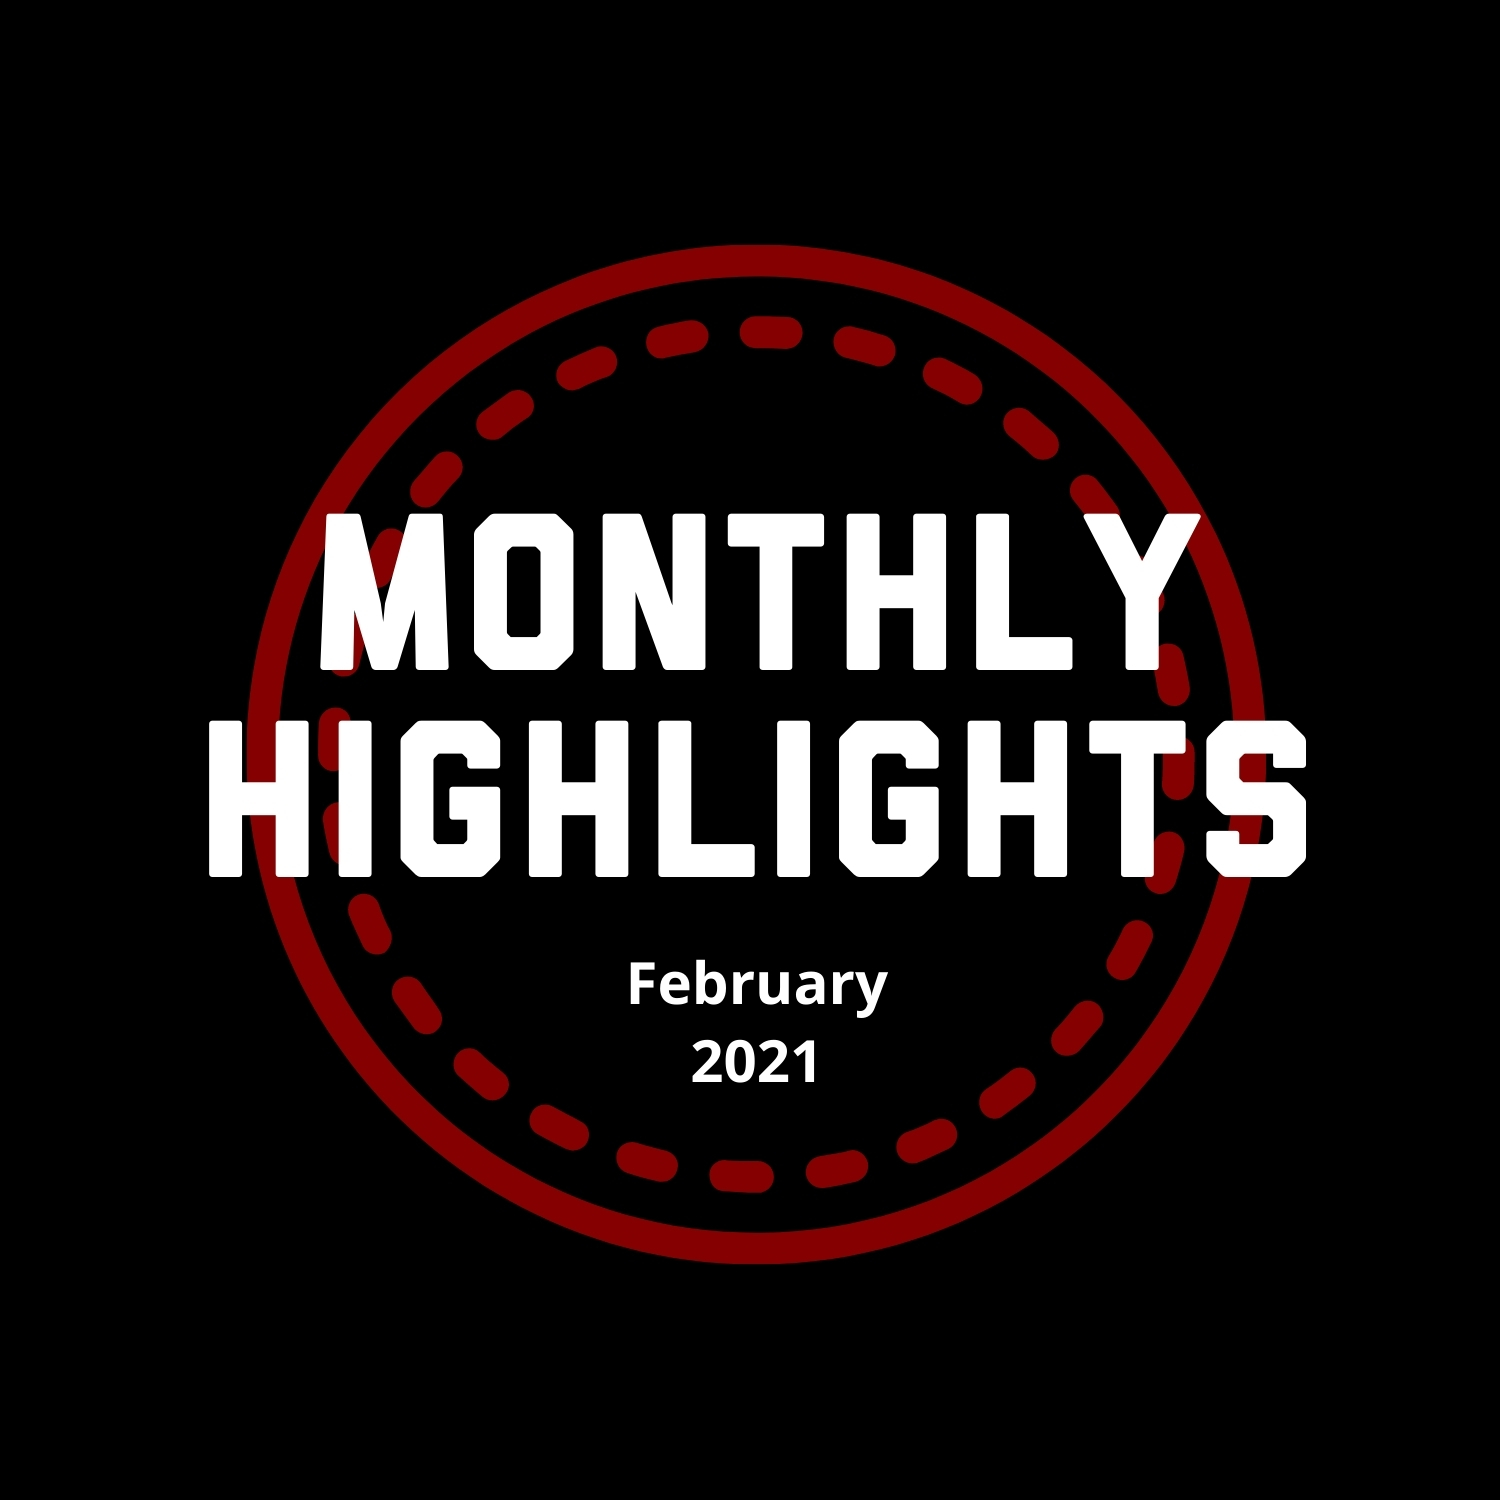 Monthly Highlights February 2021